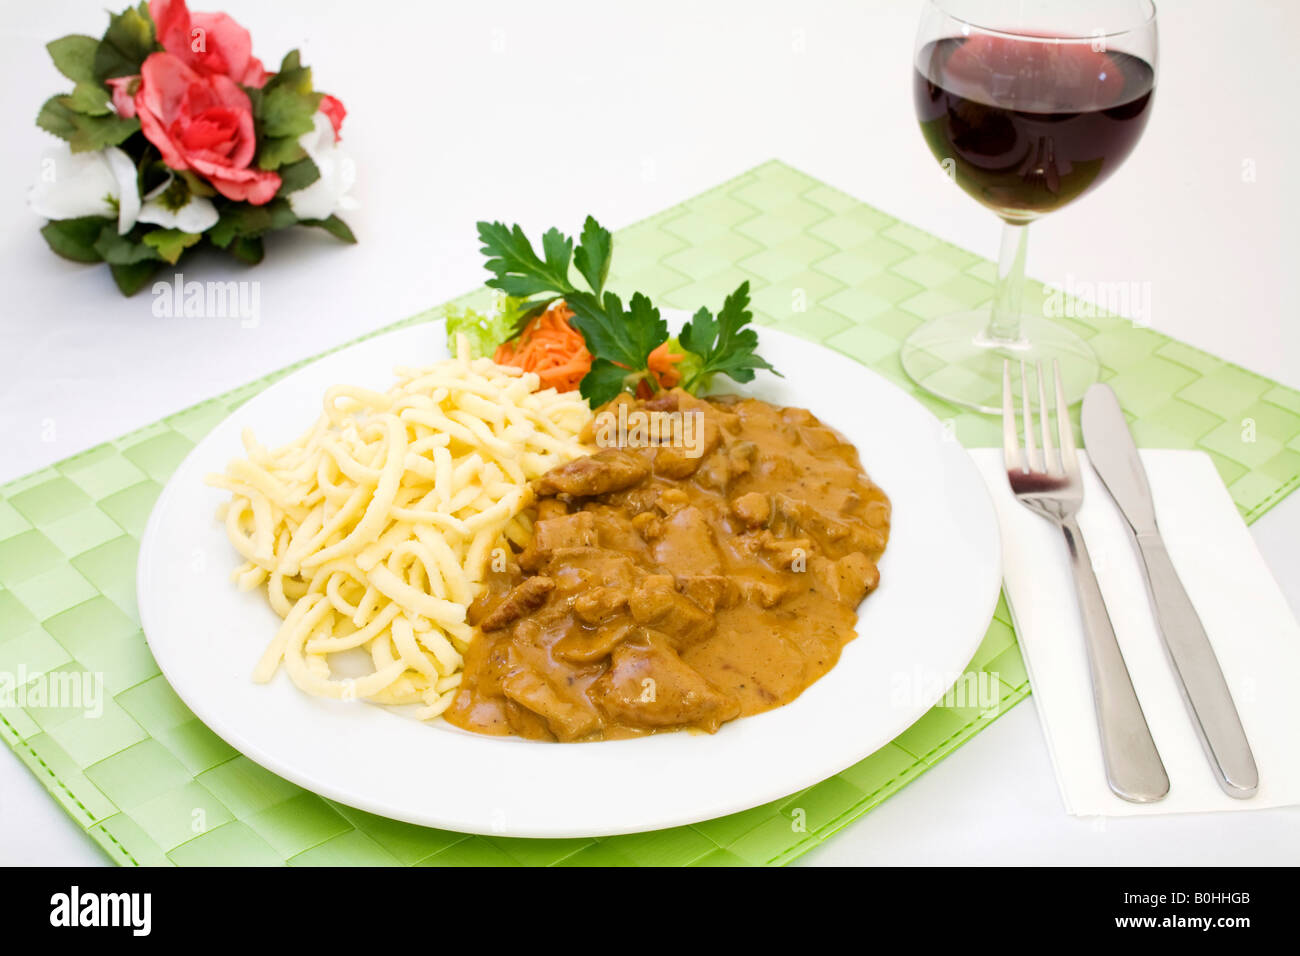 Zurich style pork filet strips with gravy served with spaetzle, fresh boiled egg noodles and a glass of red wine Stock Photo